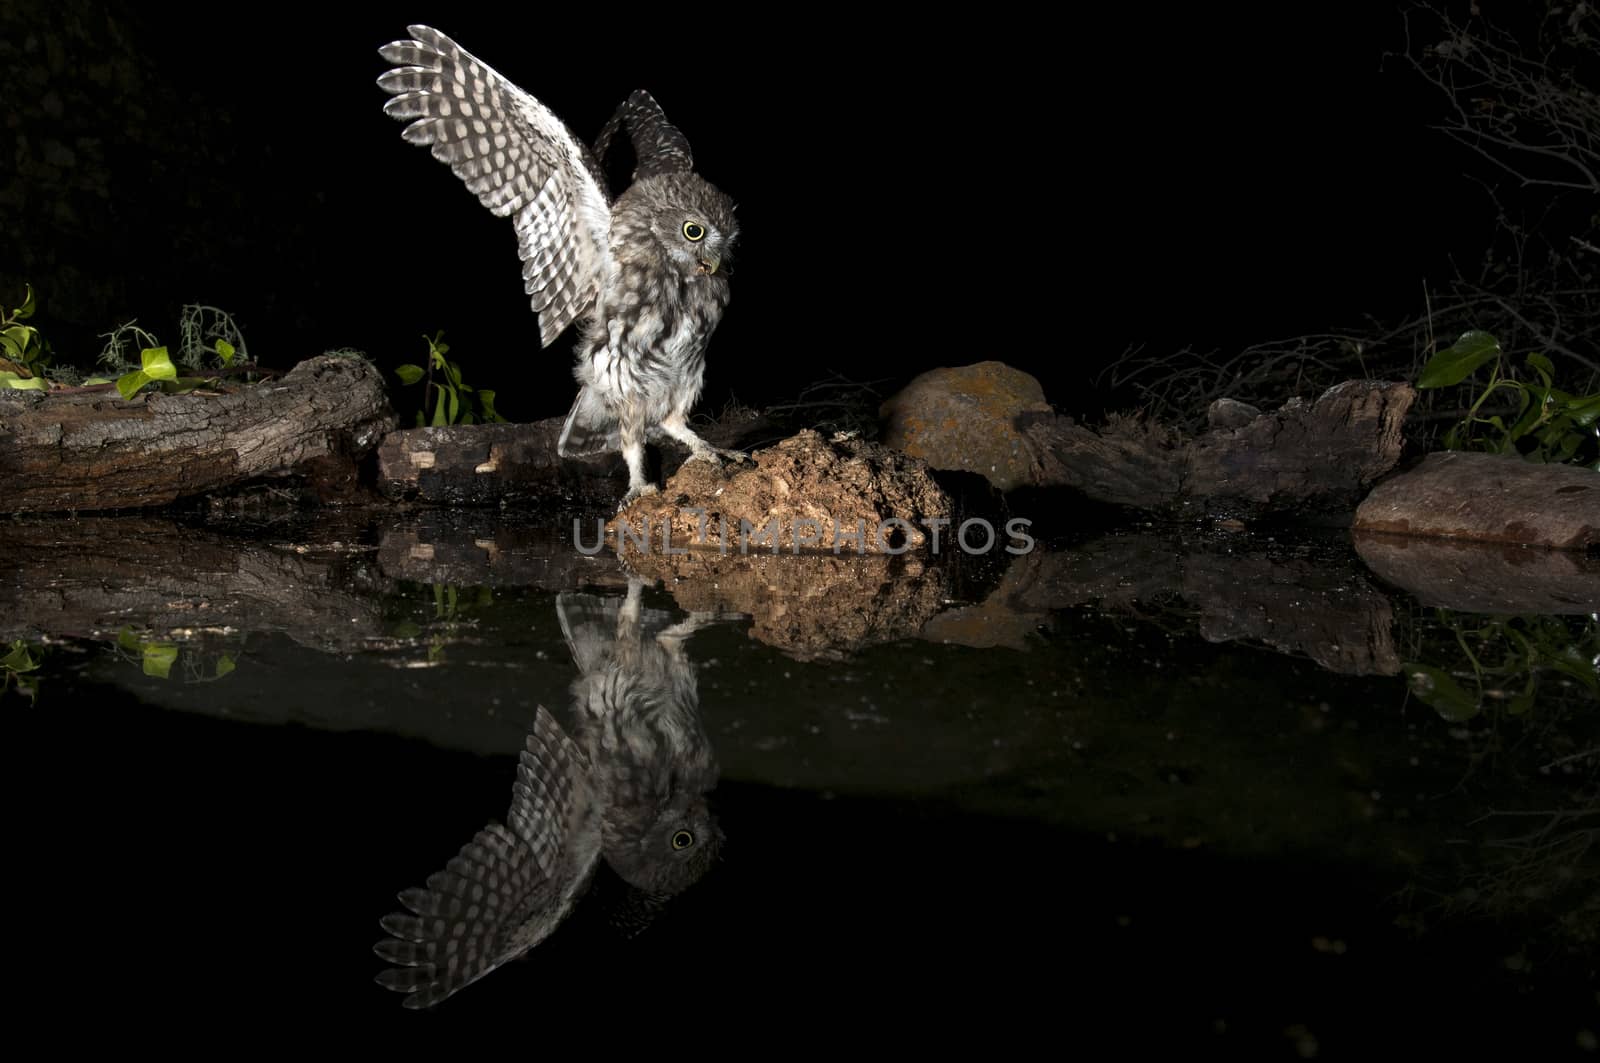 Athene noctua owl, Little Owl, perched on a rock at night, in fl by jalonsohu@gmail.com